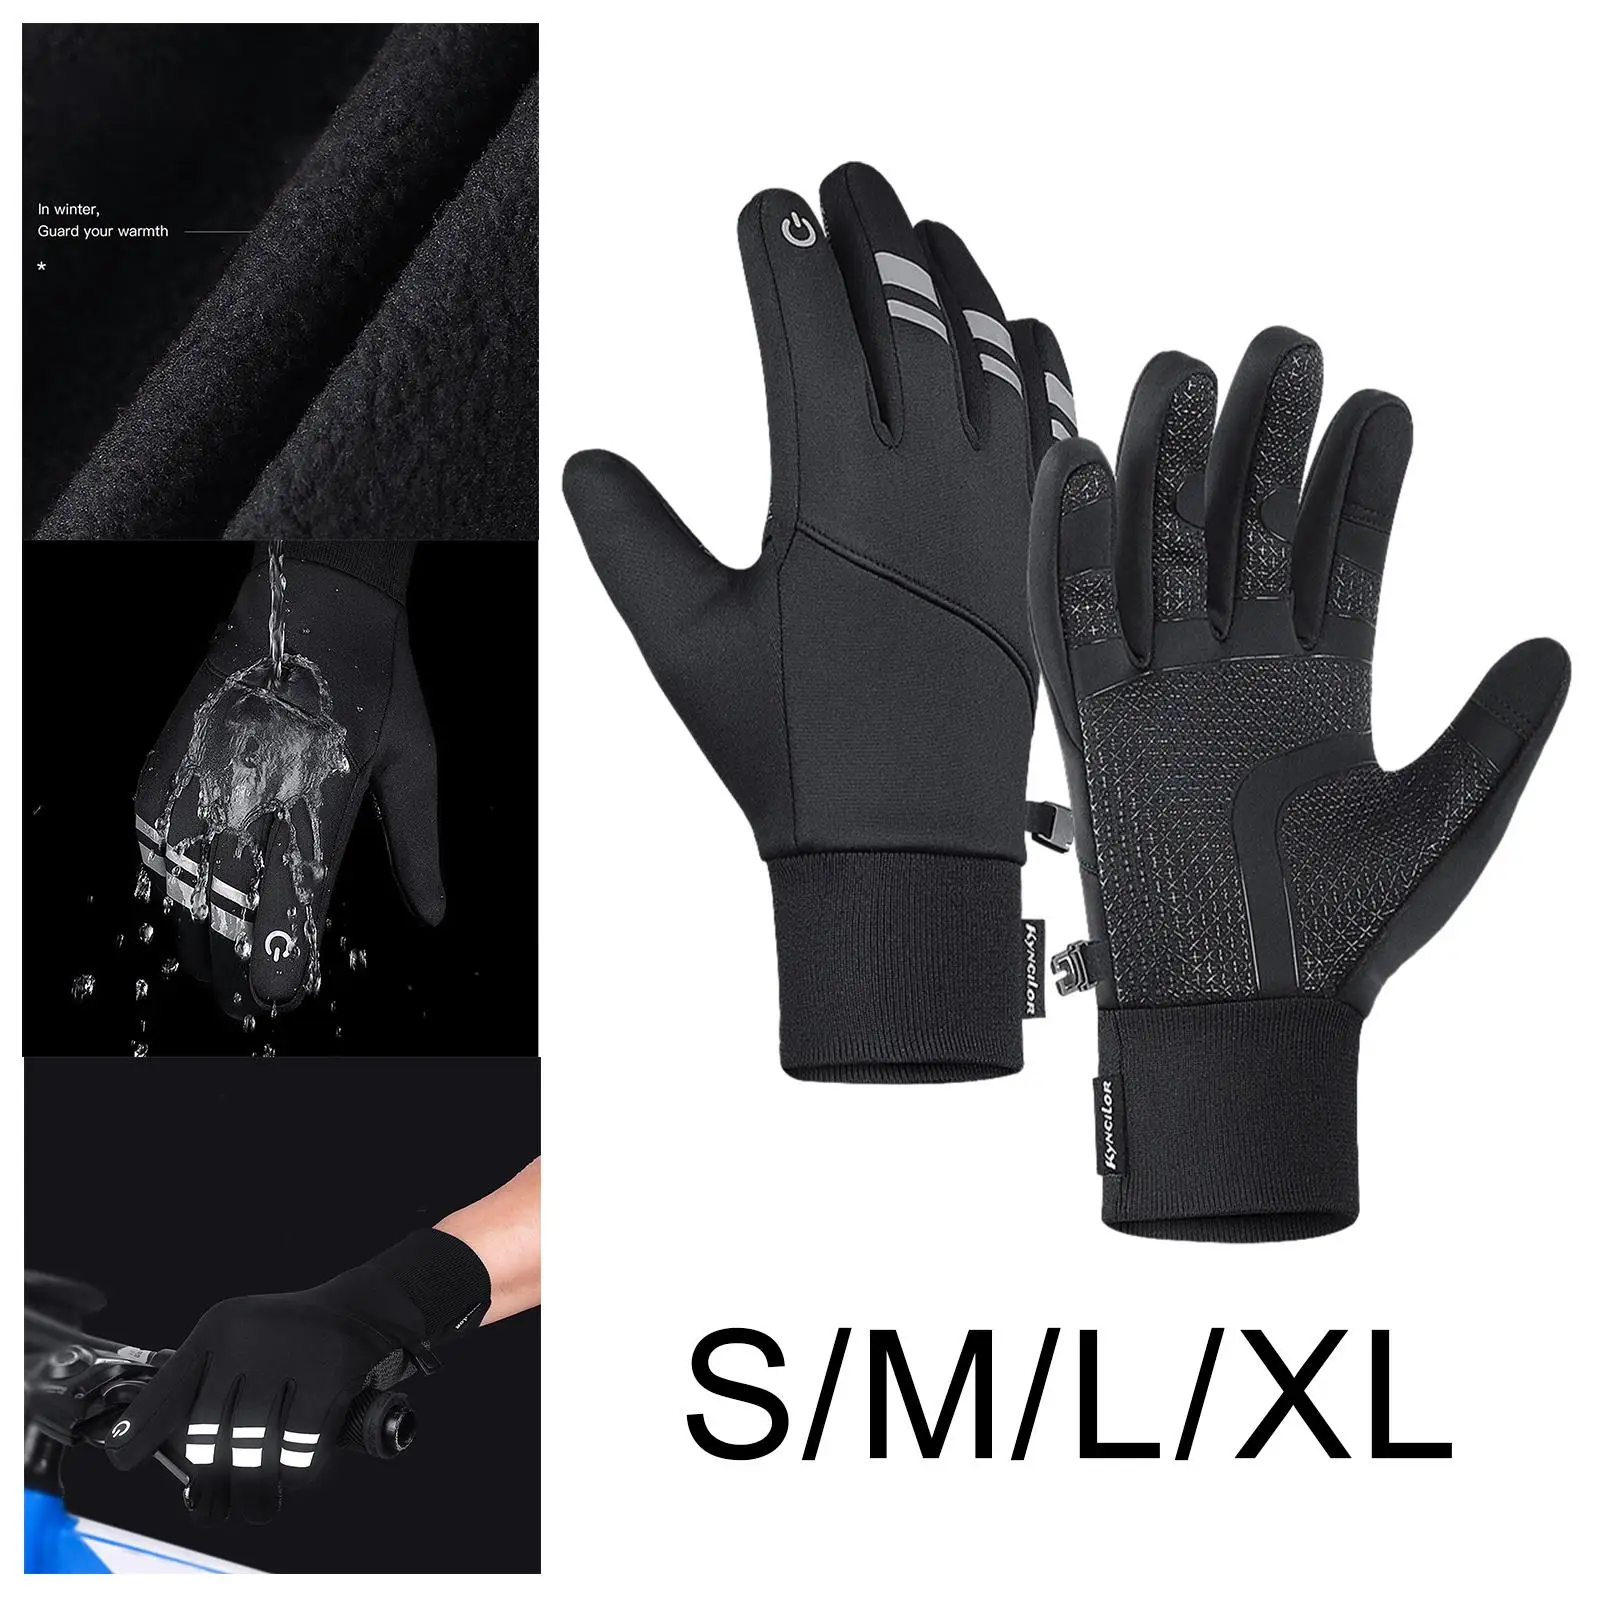 Winter Ski Gloves Touchscreen Mittens Waterproof Windproof Cycling Gloves Warm Mittens for Running Sports Driving Skating Riding